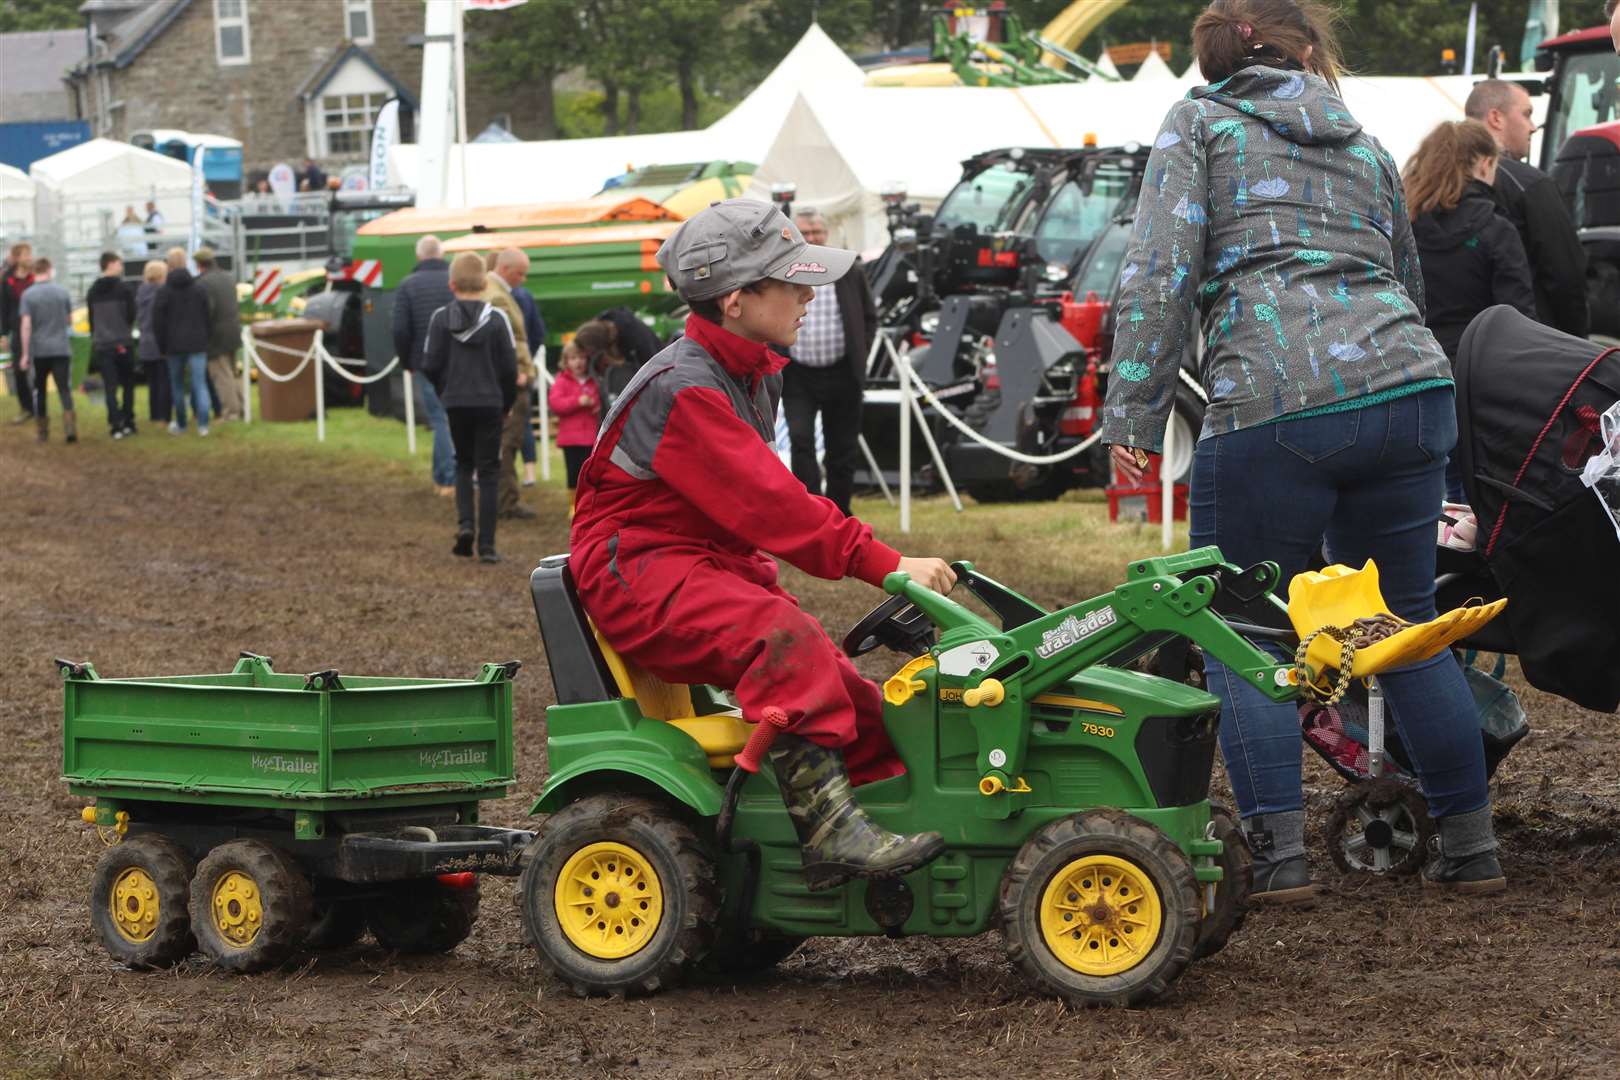 This young driver was proceeding carefully on a muddy section of the Wick showground. Picture: Alan Hendry